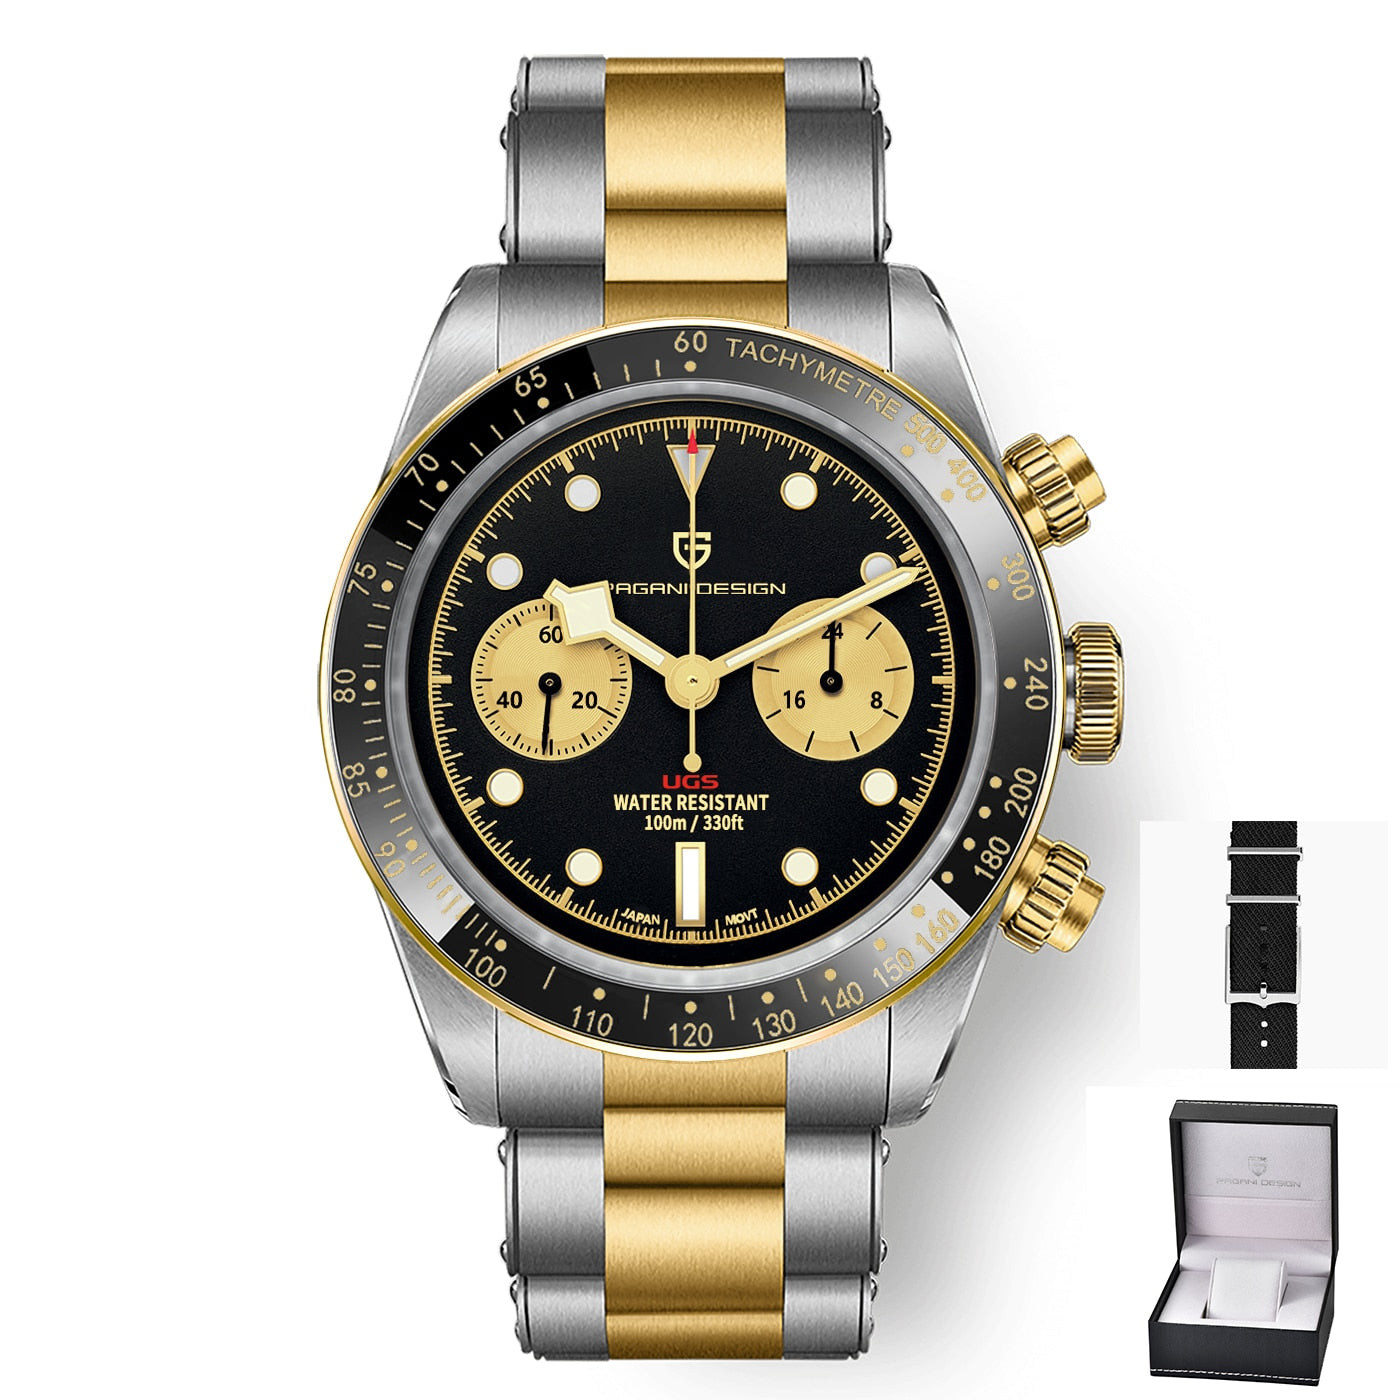 Elevate Your Style: Unveiling the 2023 New BB Panda Retro Sport Chronograph Luxury Quartz Watch for Men with Sapphire Mirror and 10Bar Waterproof Design